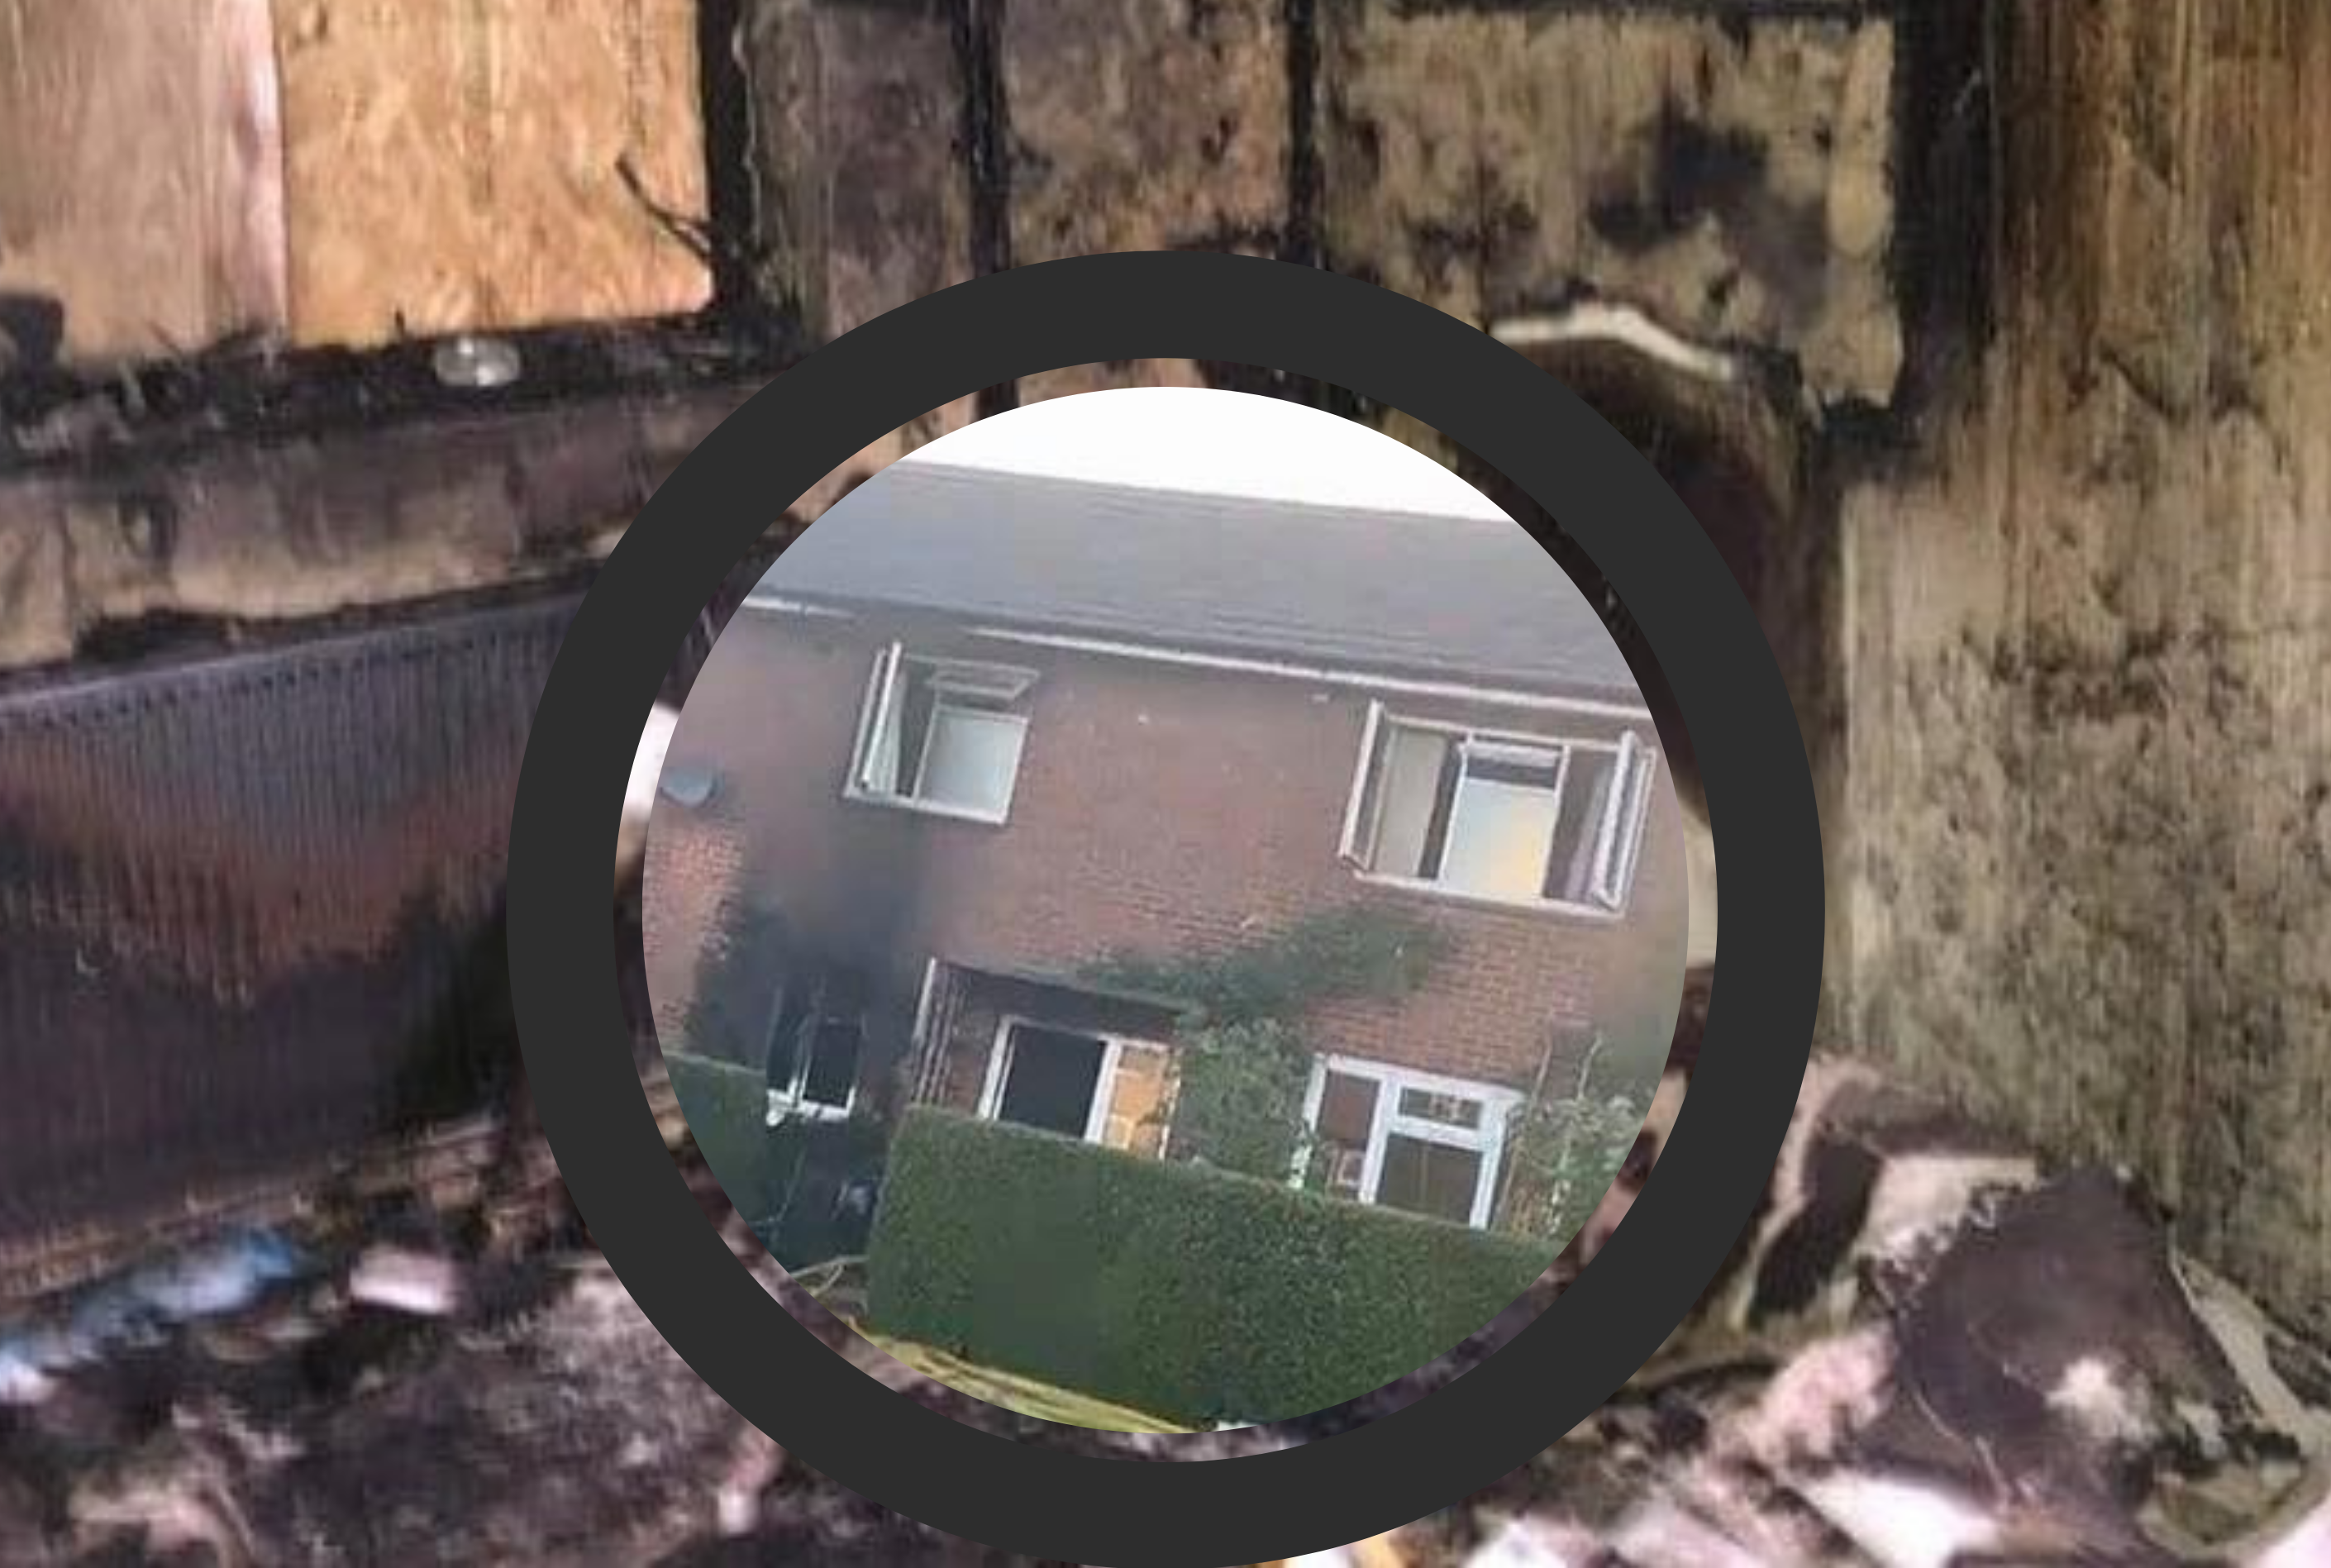 NEWS | £1200 raised for local resident who’s house was destroyed by fire in Credenhill